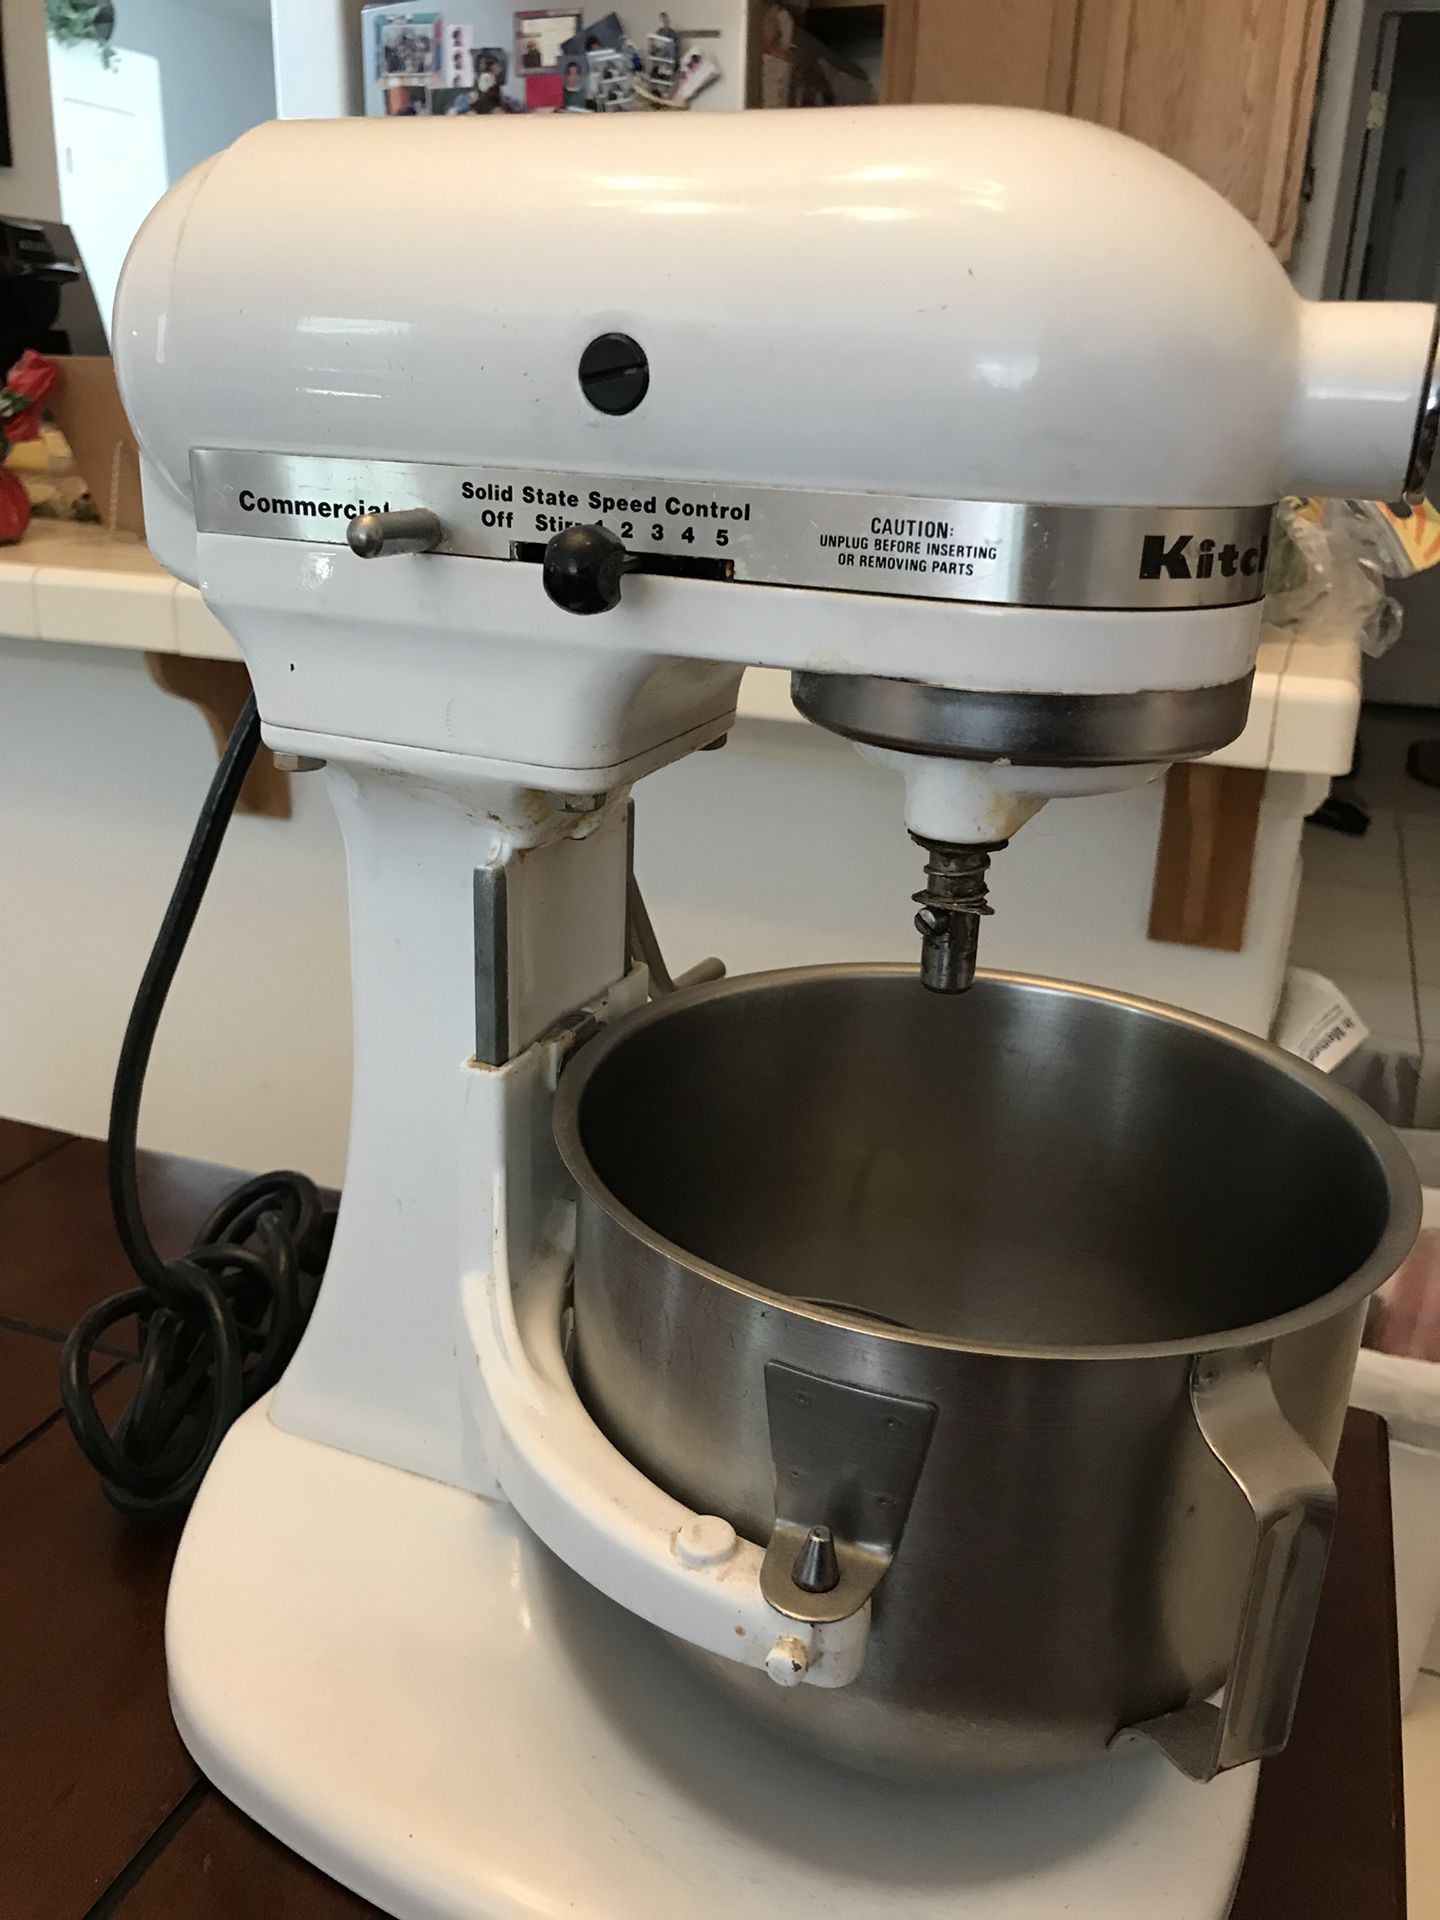 Kitchenaid Commercial 5 quart Stand Mixer KSMC50S with Bowl and Dough Hook